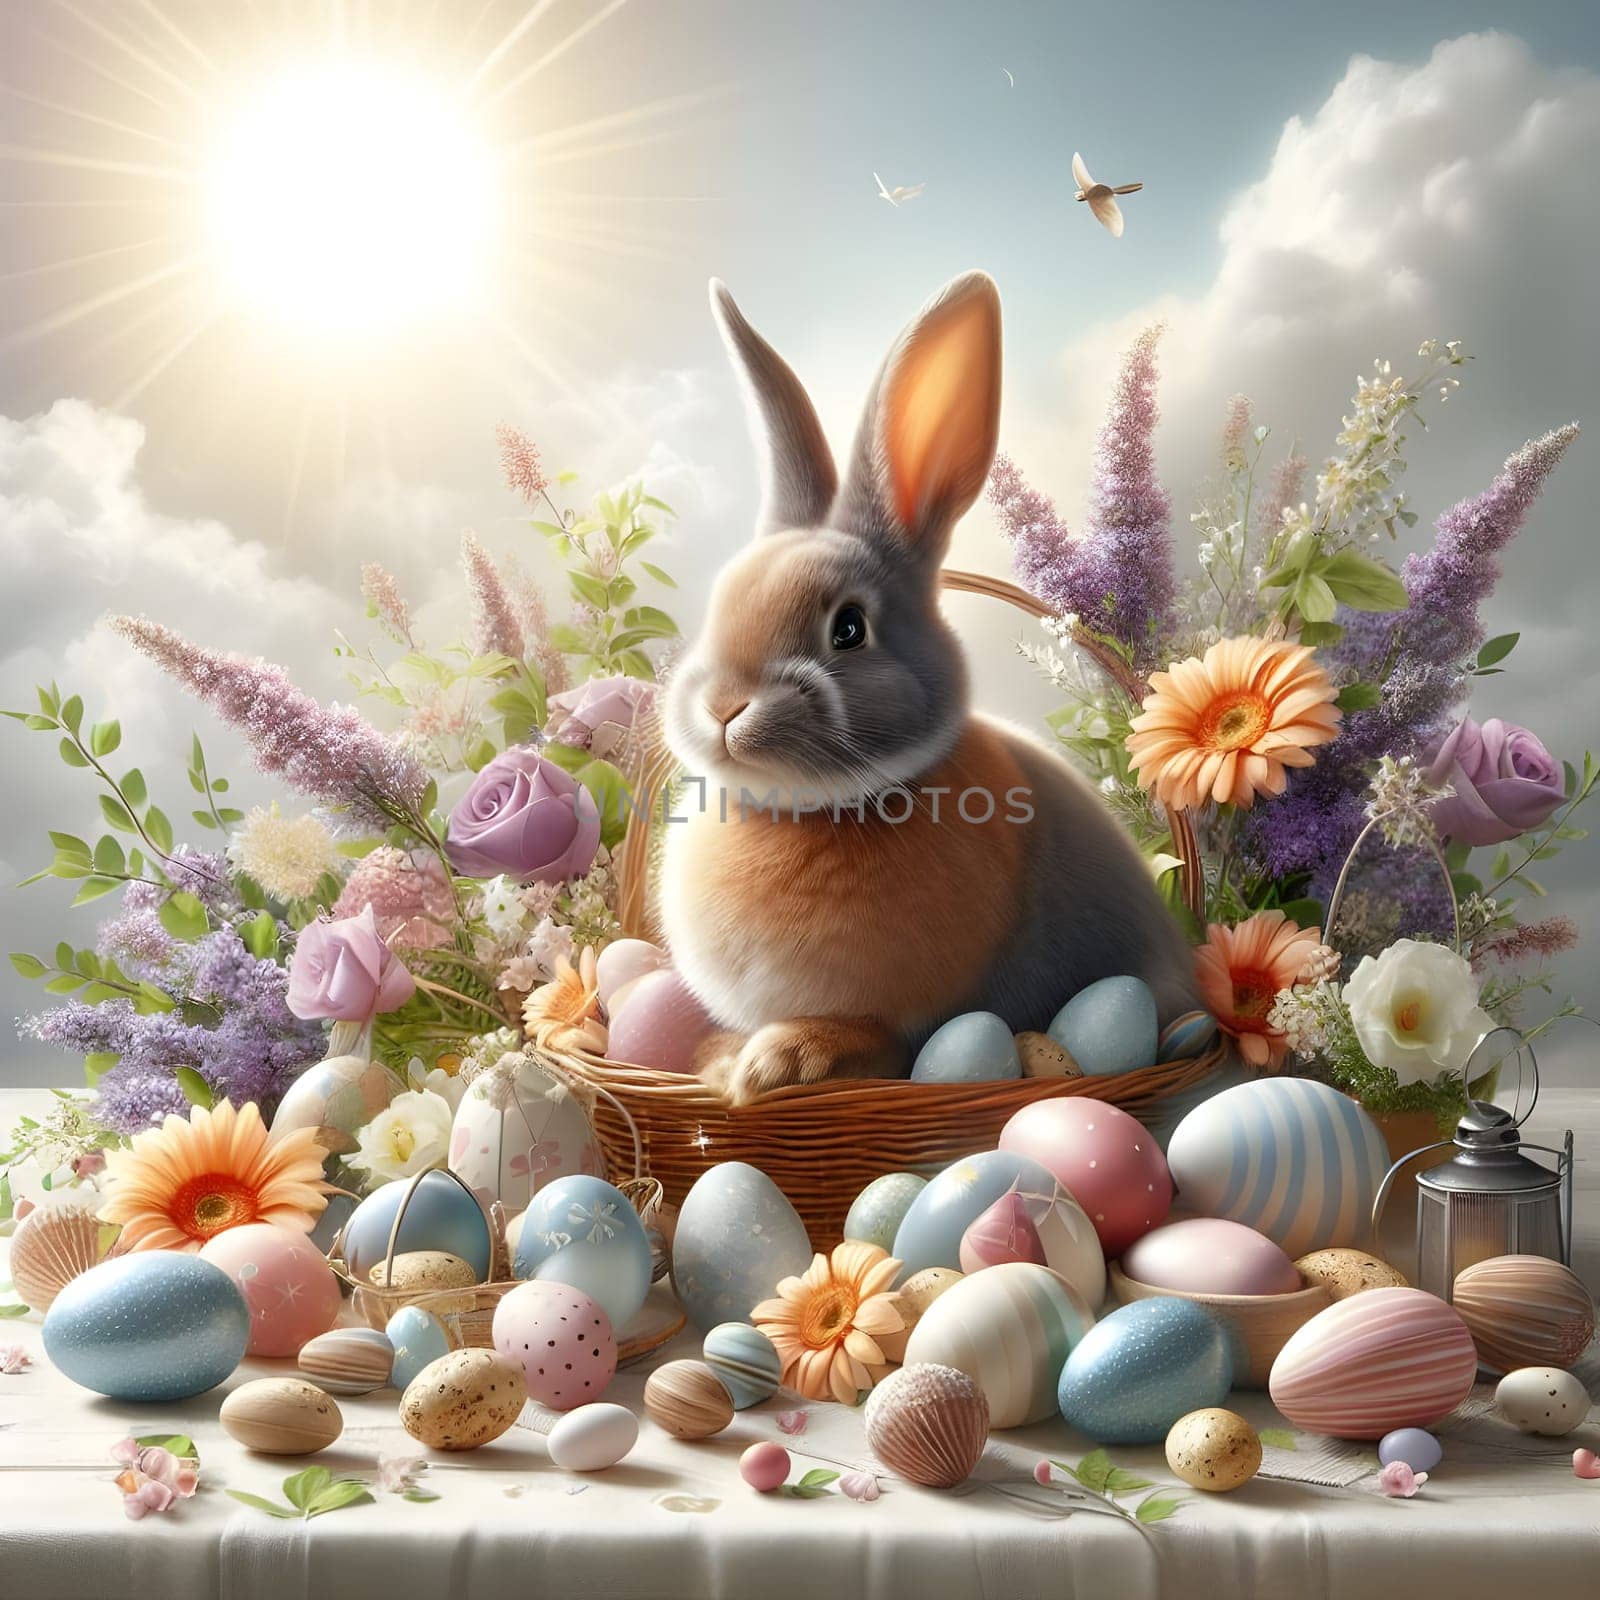 Happy Easter. Easter bunny with a basket of eggs. Happy Easter Bunny on a card on their hind legs with flowers at sunset. Cute hare by Designlab